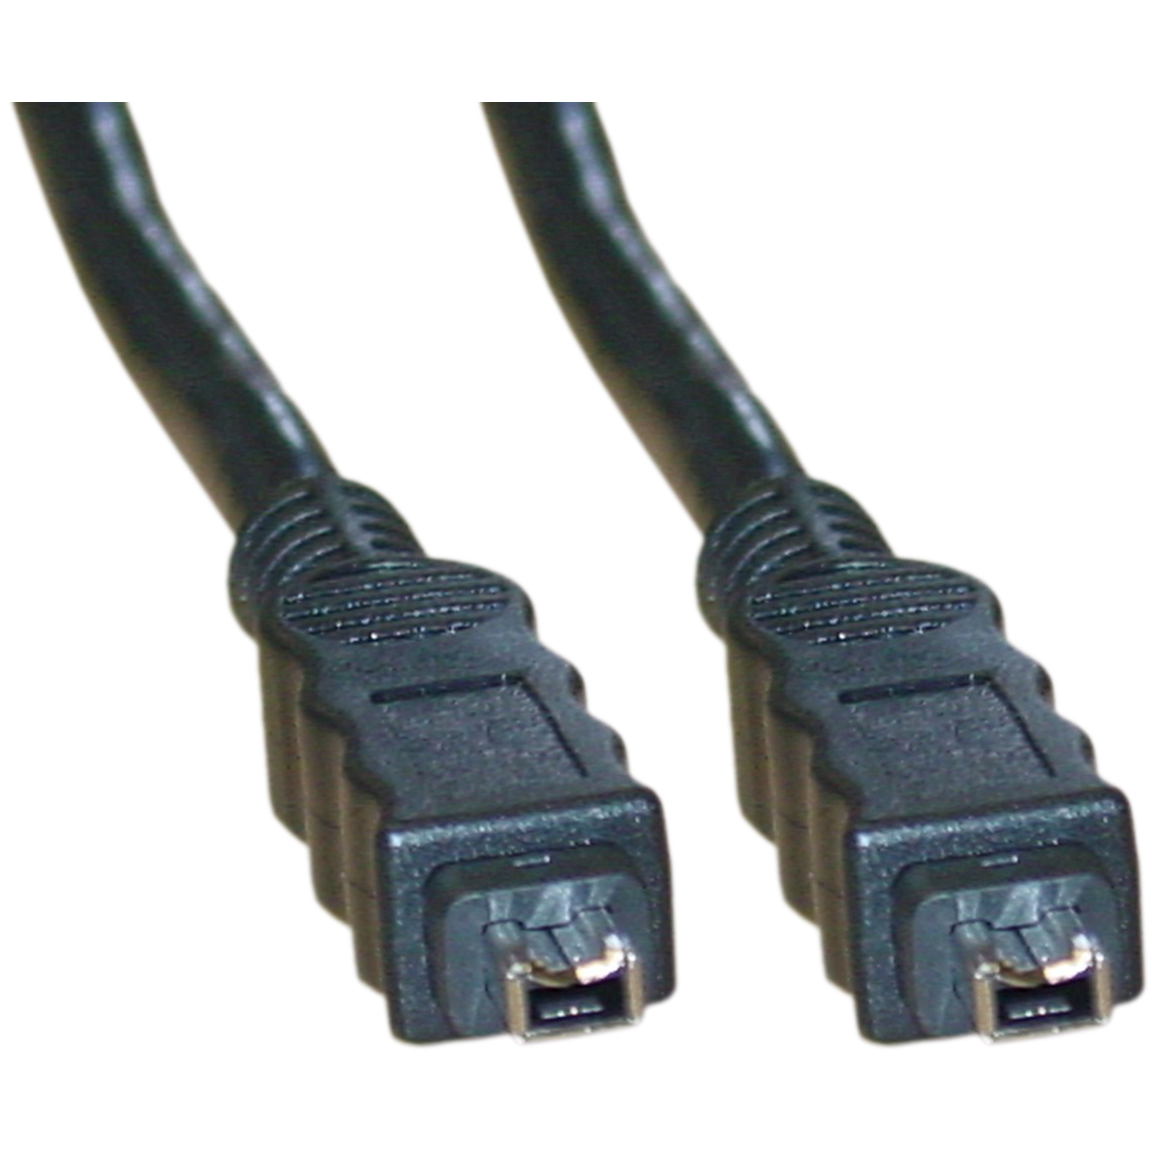 FireWire Dynex DX-FR6-4 4 Feet Retractable IEEE 1394 6-Pin to 4-Pin Cable 